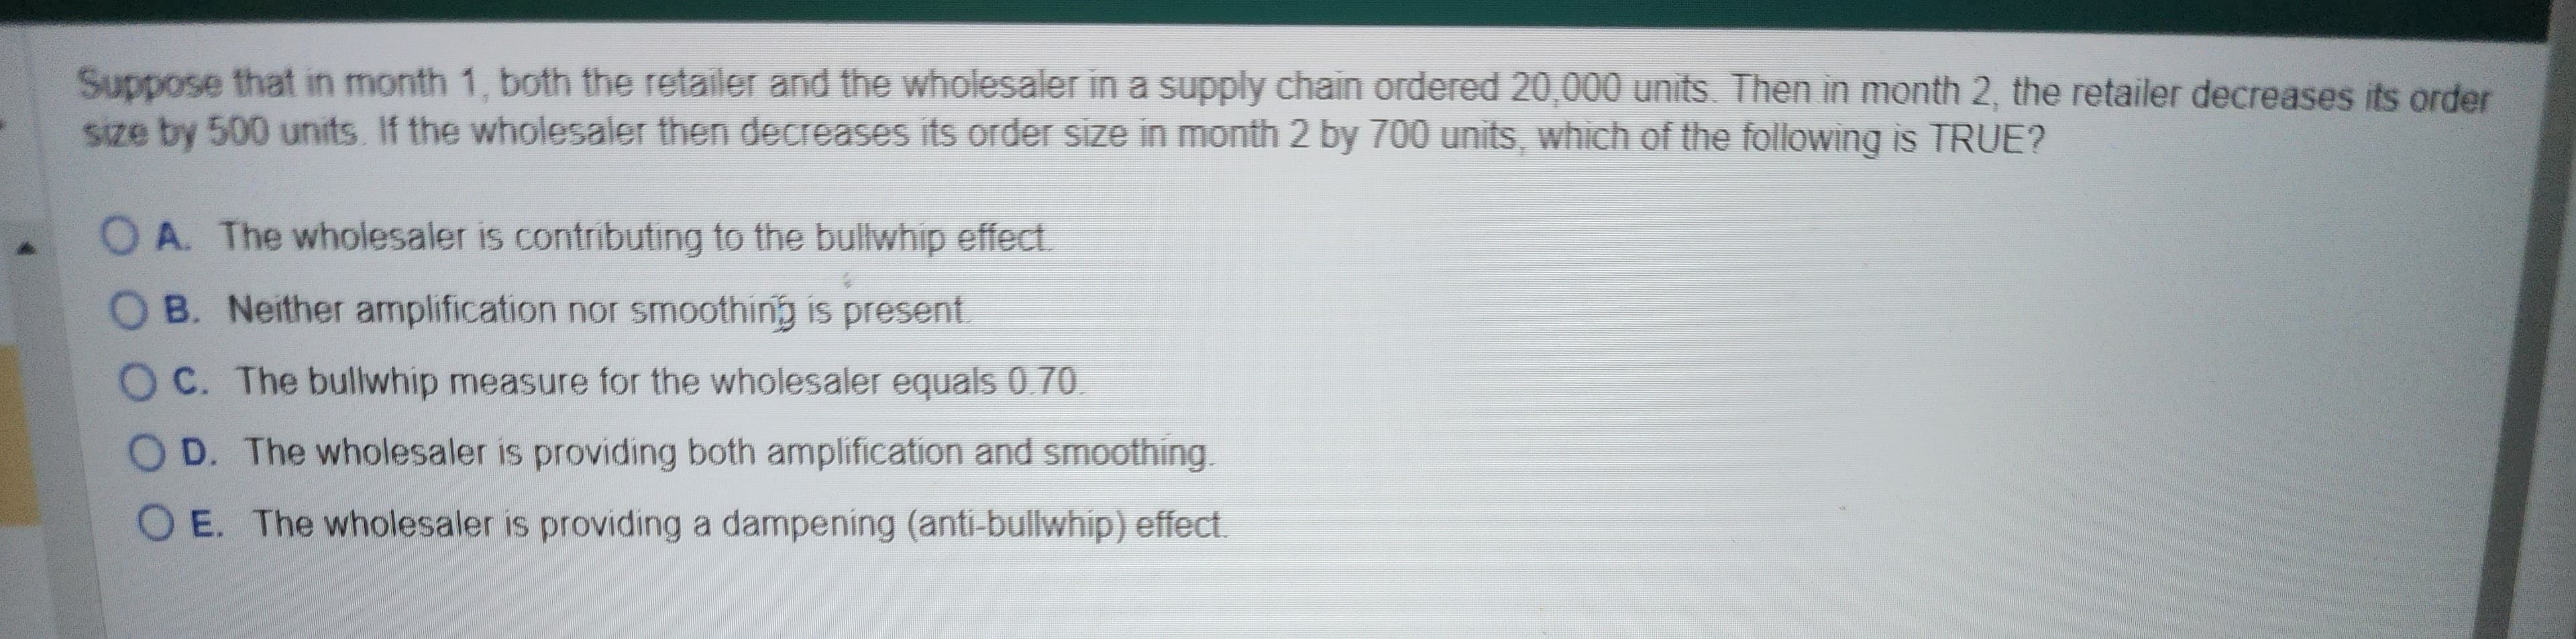 Suppose that in month 1, both the retailer and the wholesaler in a supply chain ordered 20,000 units. Then in month 2, the retailer decreases its order
size by 500 units. If the wholesaler then decreases its order size in month 2 by 700 units, which of the following is TRUE?
OA. The wholesaler is contributing to the bullwhip effect.
B. Neither amplification nor smoothing is present.
OC. The bullwhip measure for the wholesaler equals 0.70.
D. The wholesaler is providing both amplification and smoothing.
O E. The wholesaler is providing a dampening (anti-bullwhip) effect.